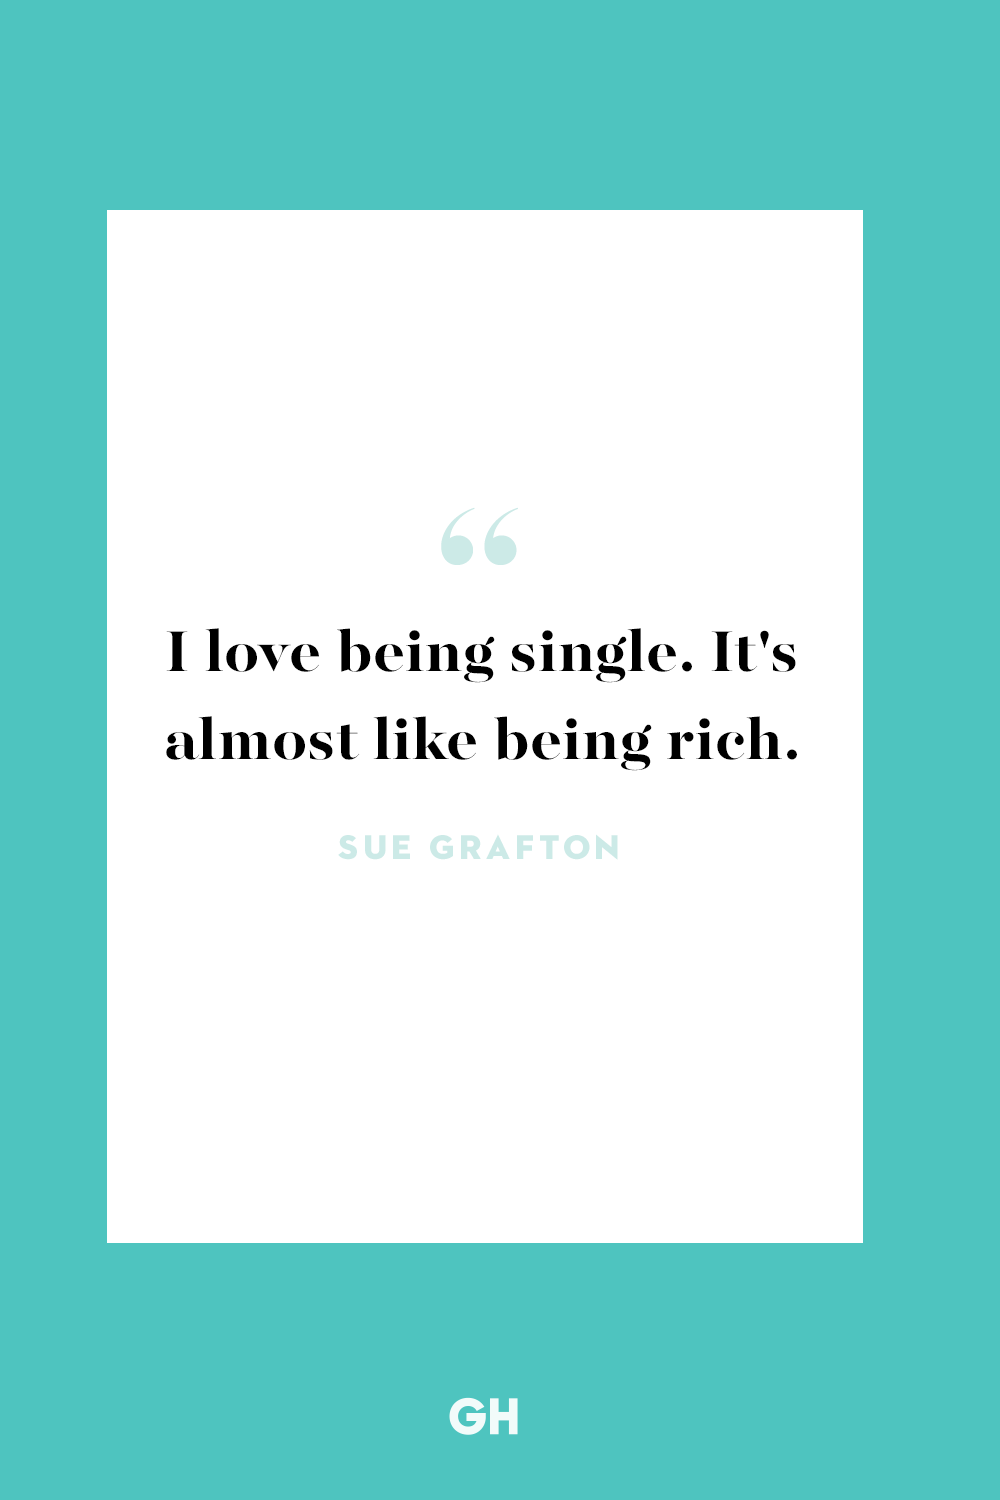 Being Single Quotes Quotations for Happily Single People